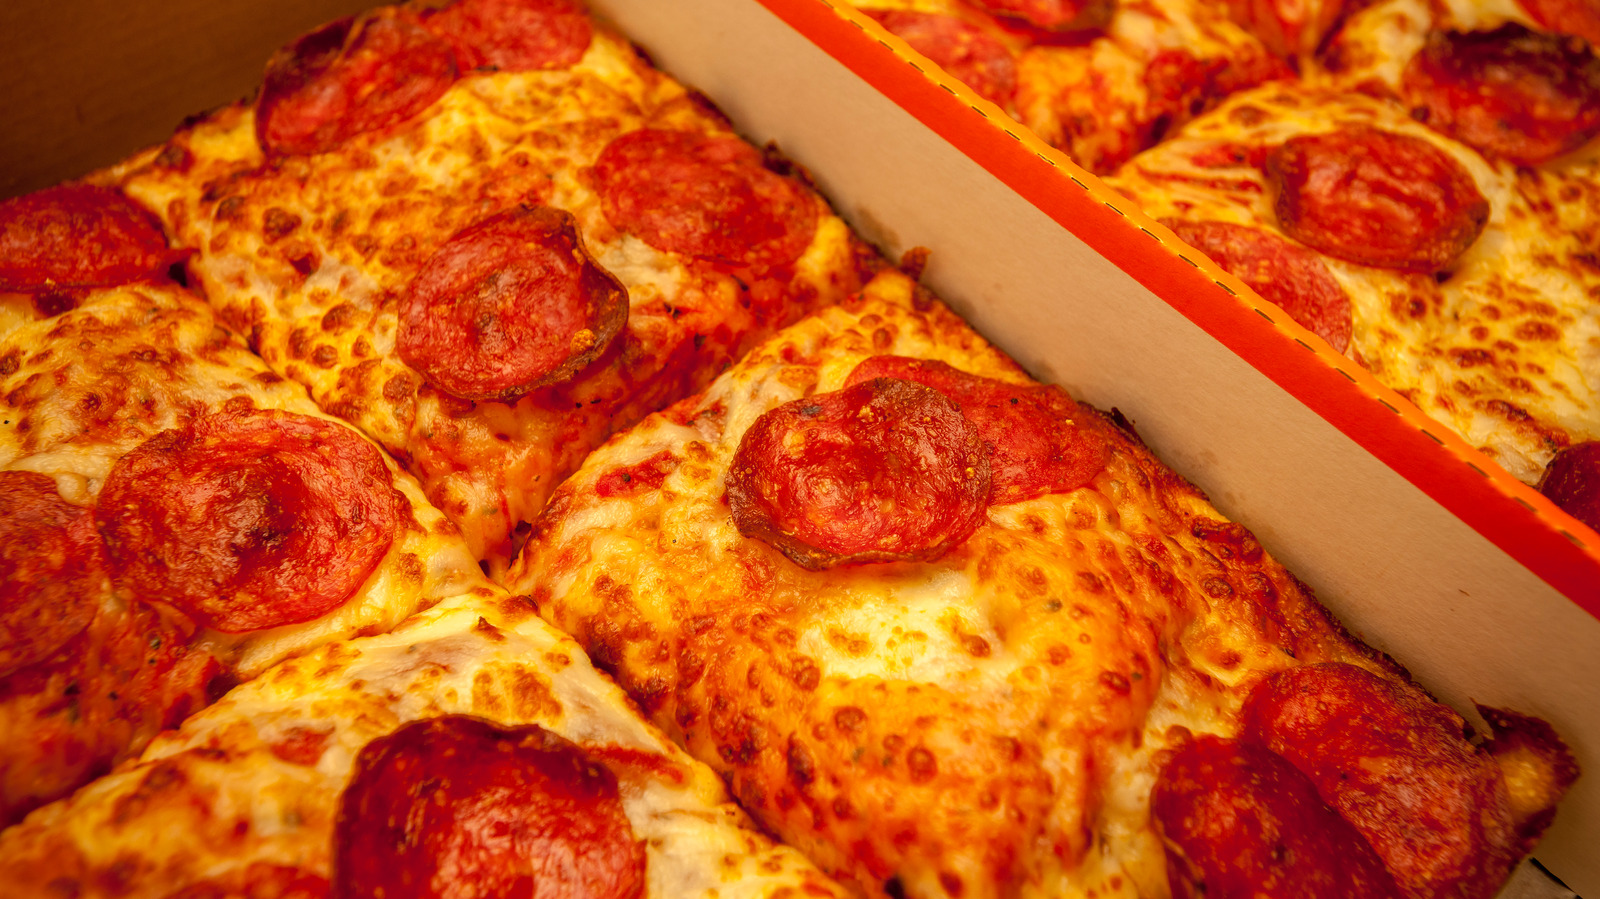 Little Caesars' NFL Announcement Has People Hoping For More Pizza Deals